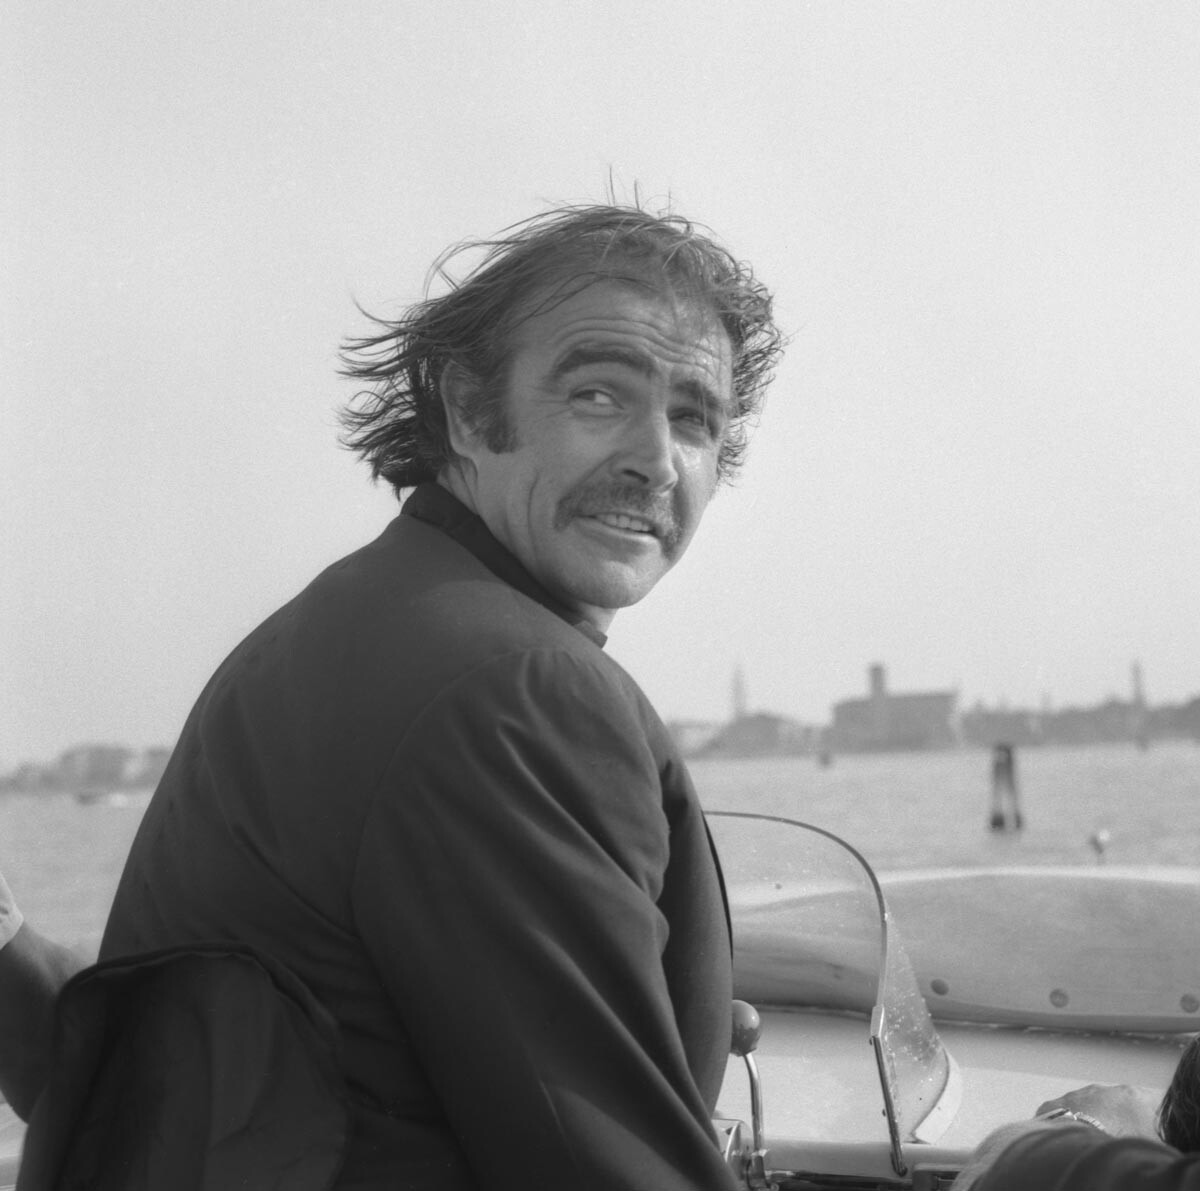 Sean Connery, portrayed on a water taxi in Venice, 1970s.